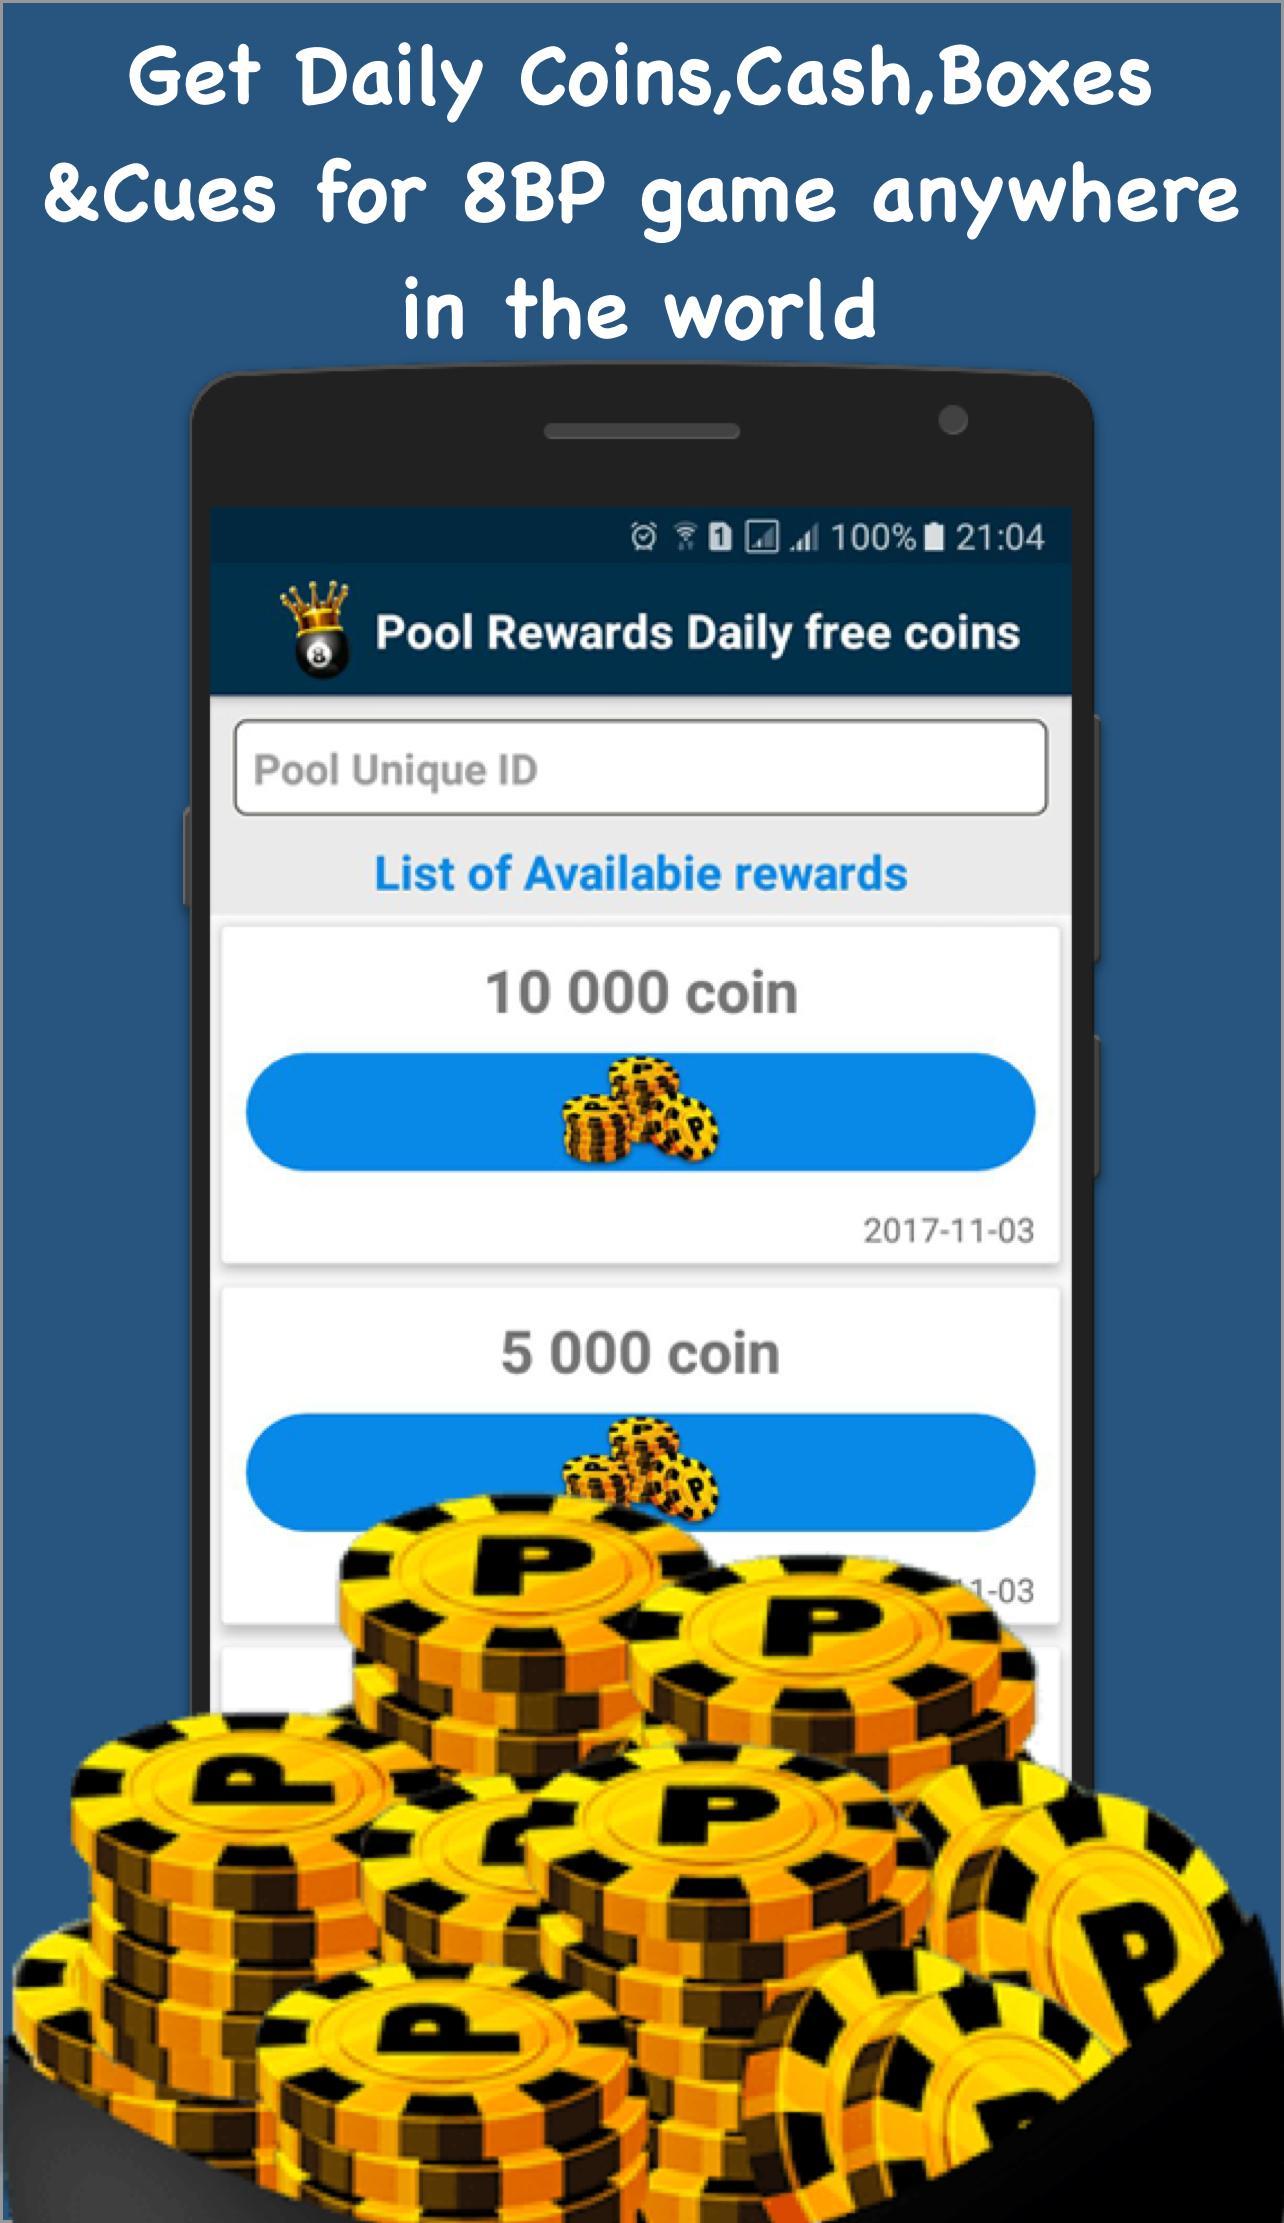 Pool Rewards Daily free Coins APK Download for Android - Latest Version